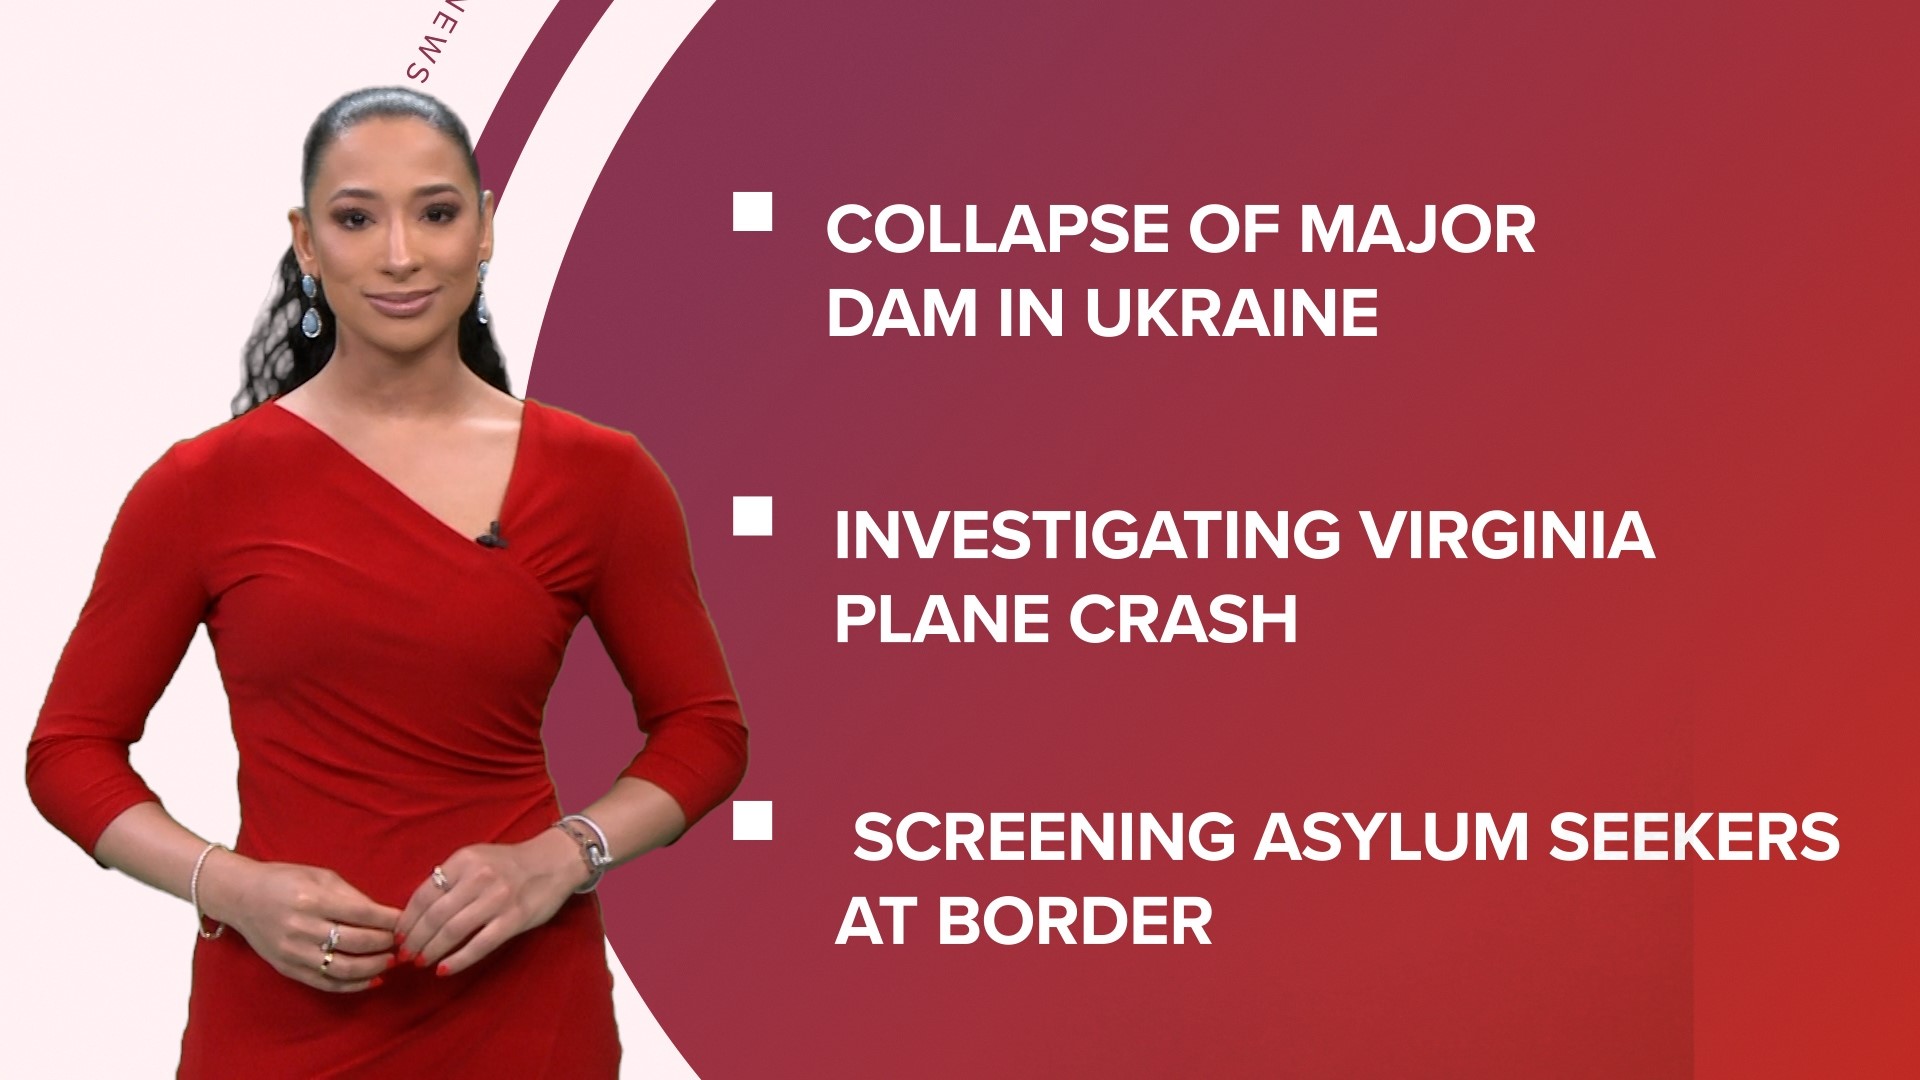 A look at what is happening in the news from a major dam collapsing in Ukraine to the Kansas City Chiefs visit the White House and Apple's new VR headset.